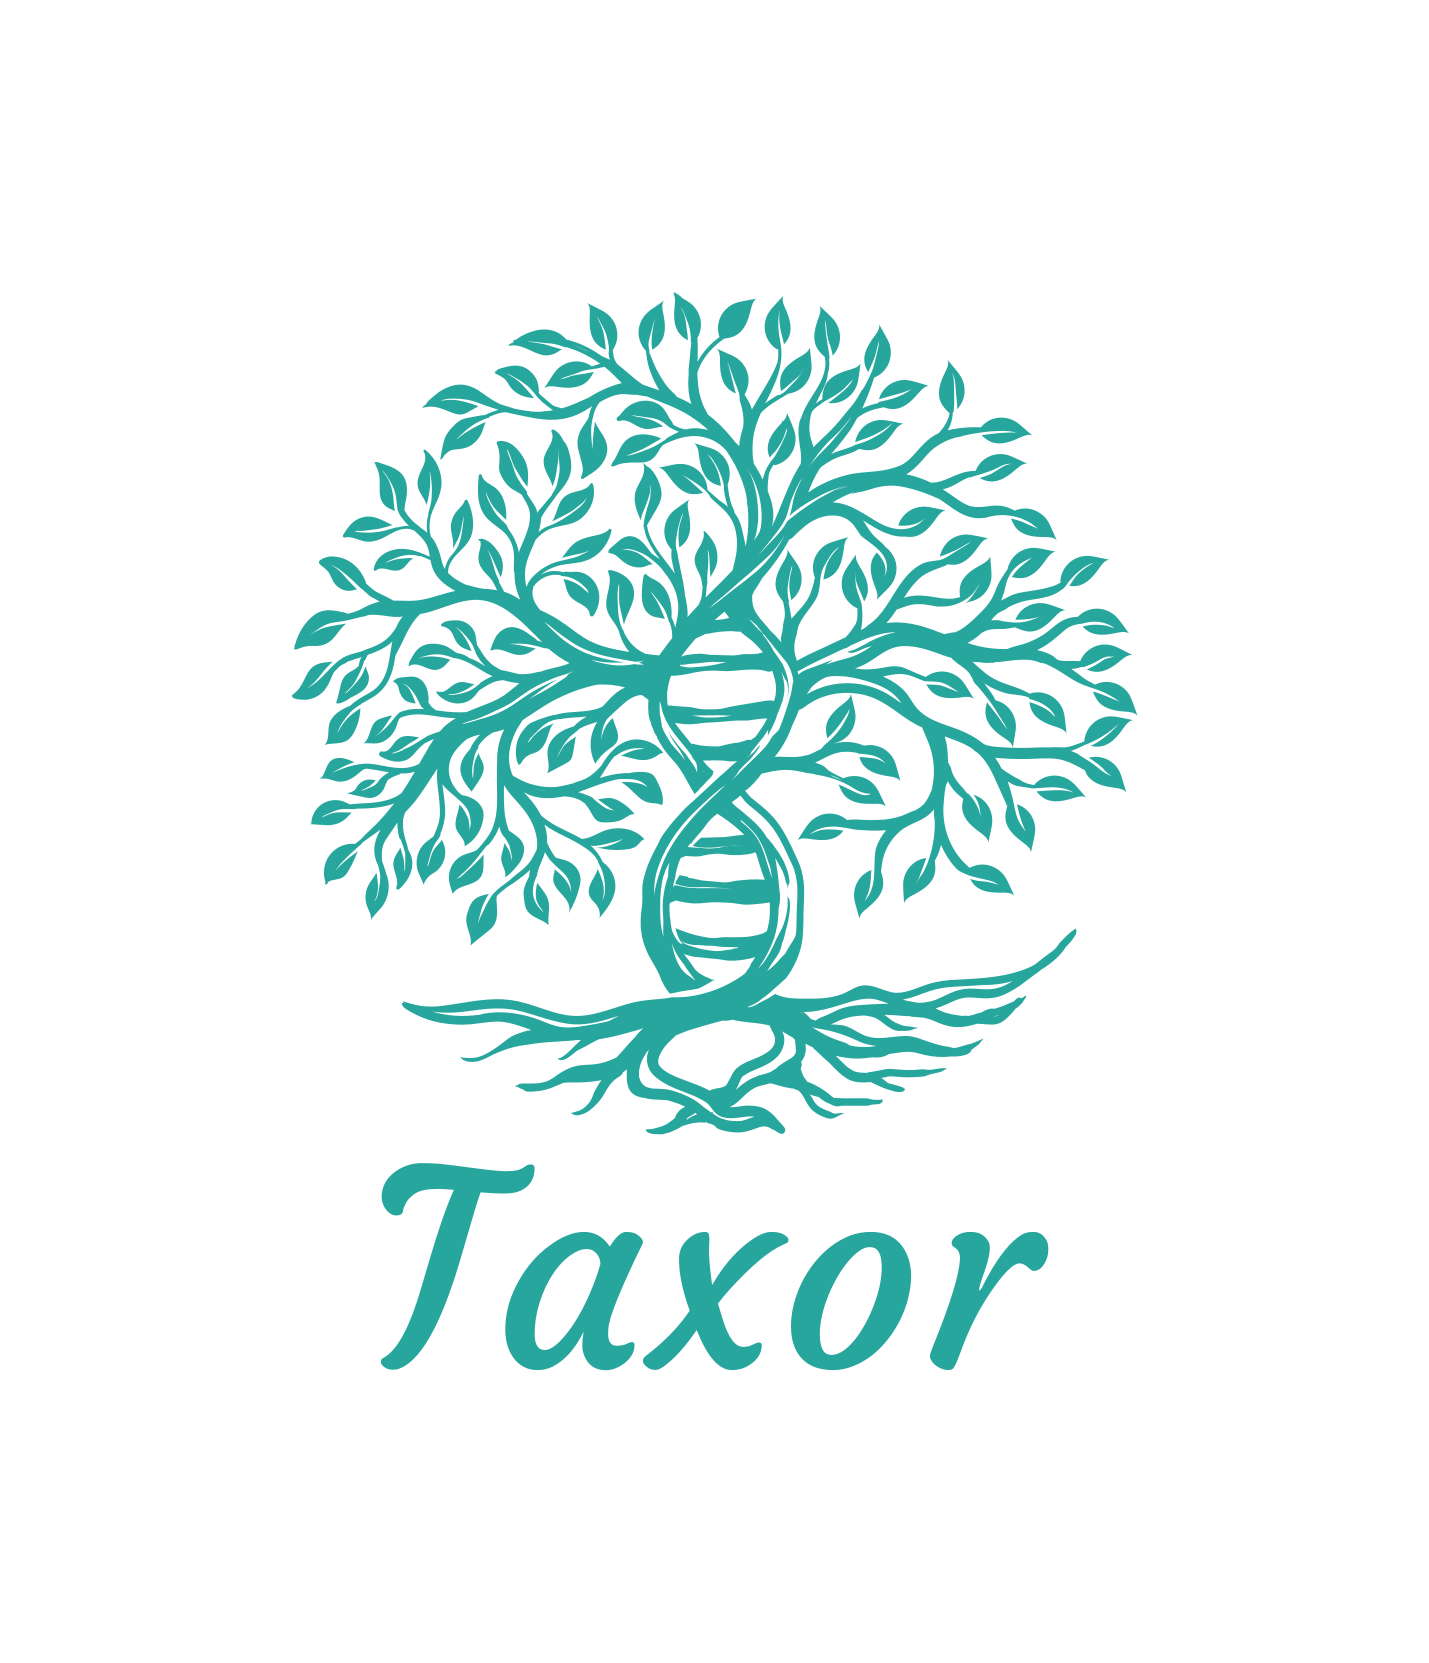 Taxonomic classification with XOR filters